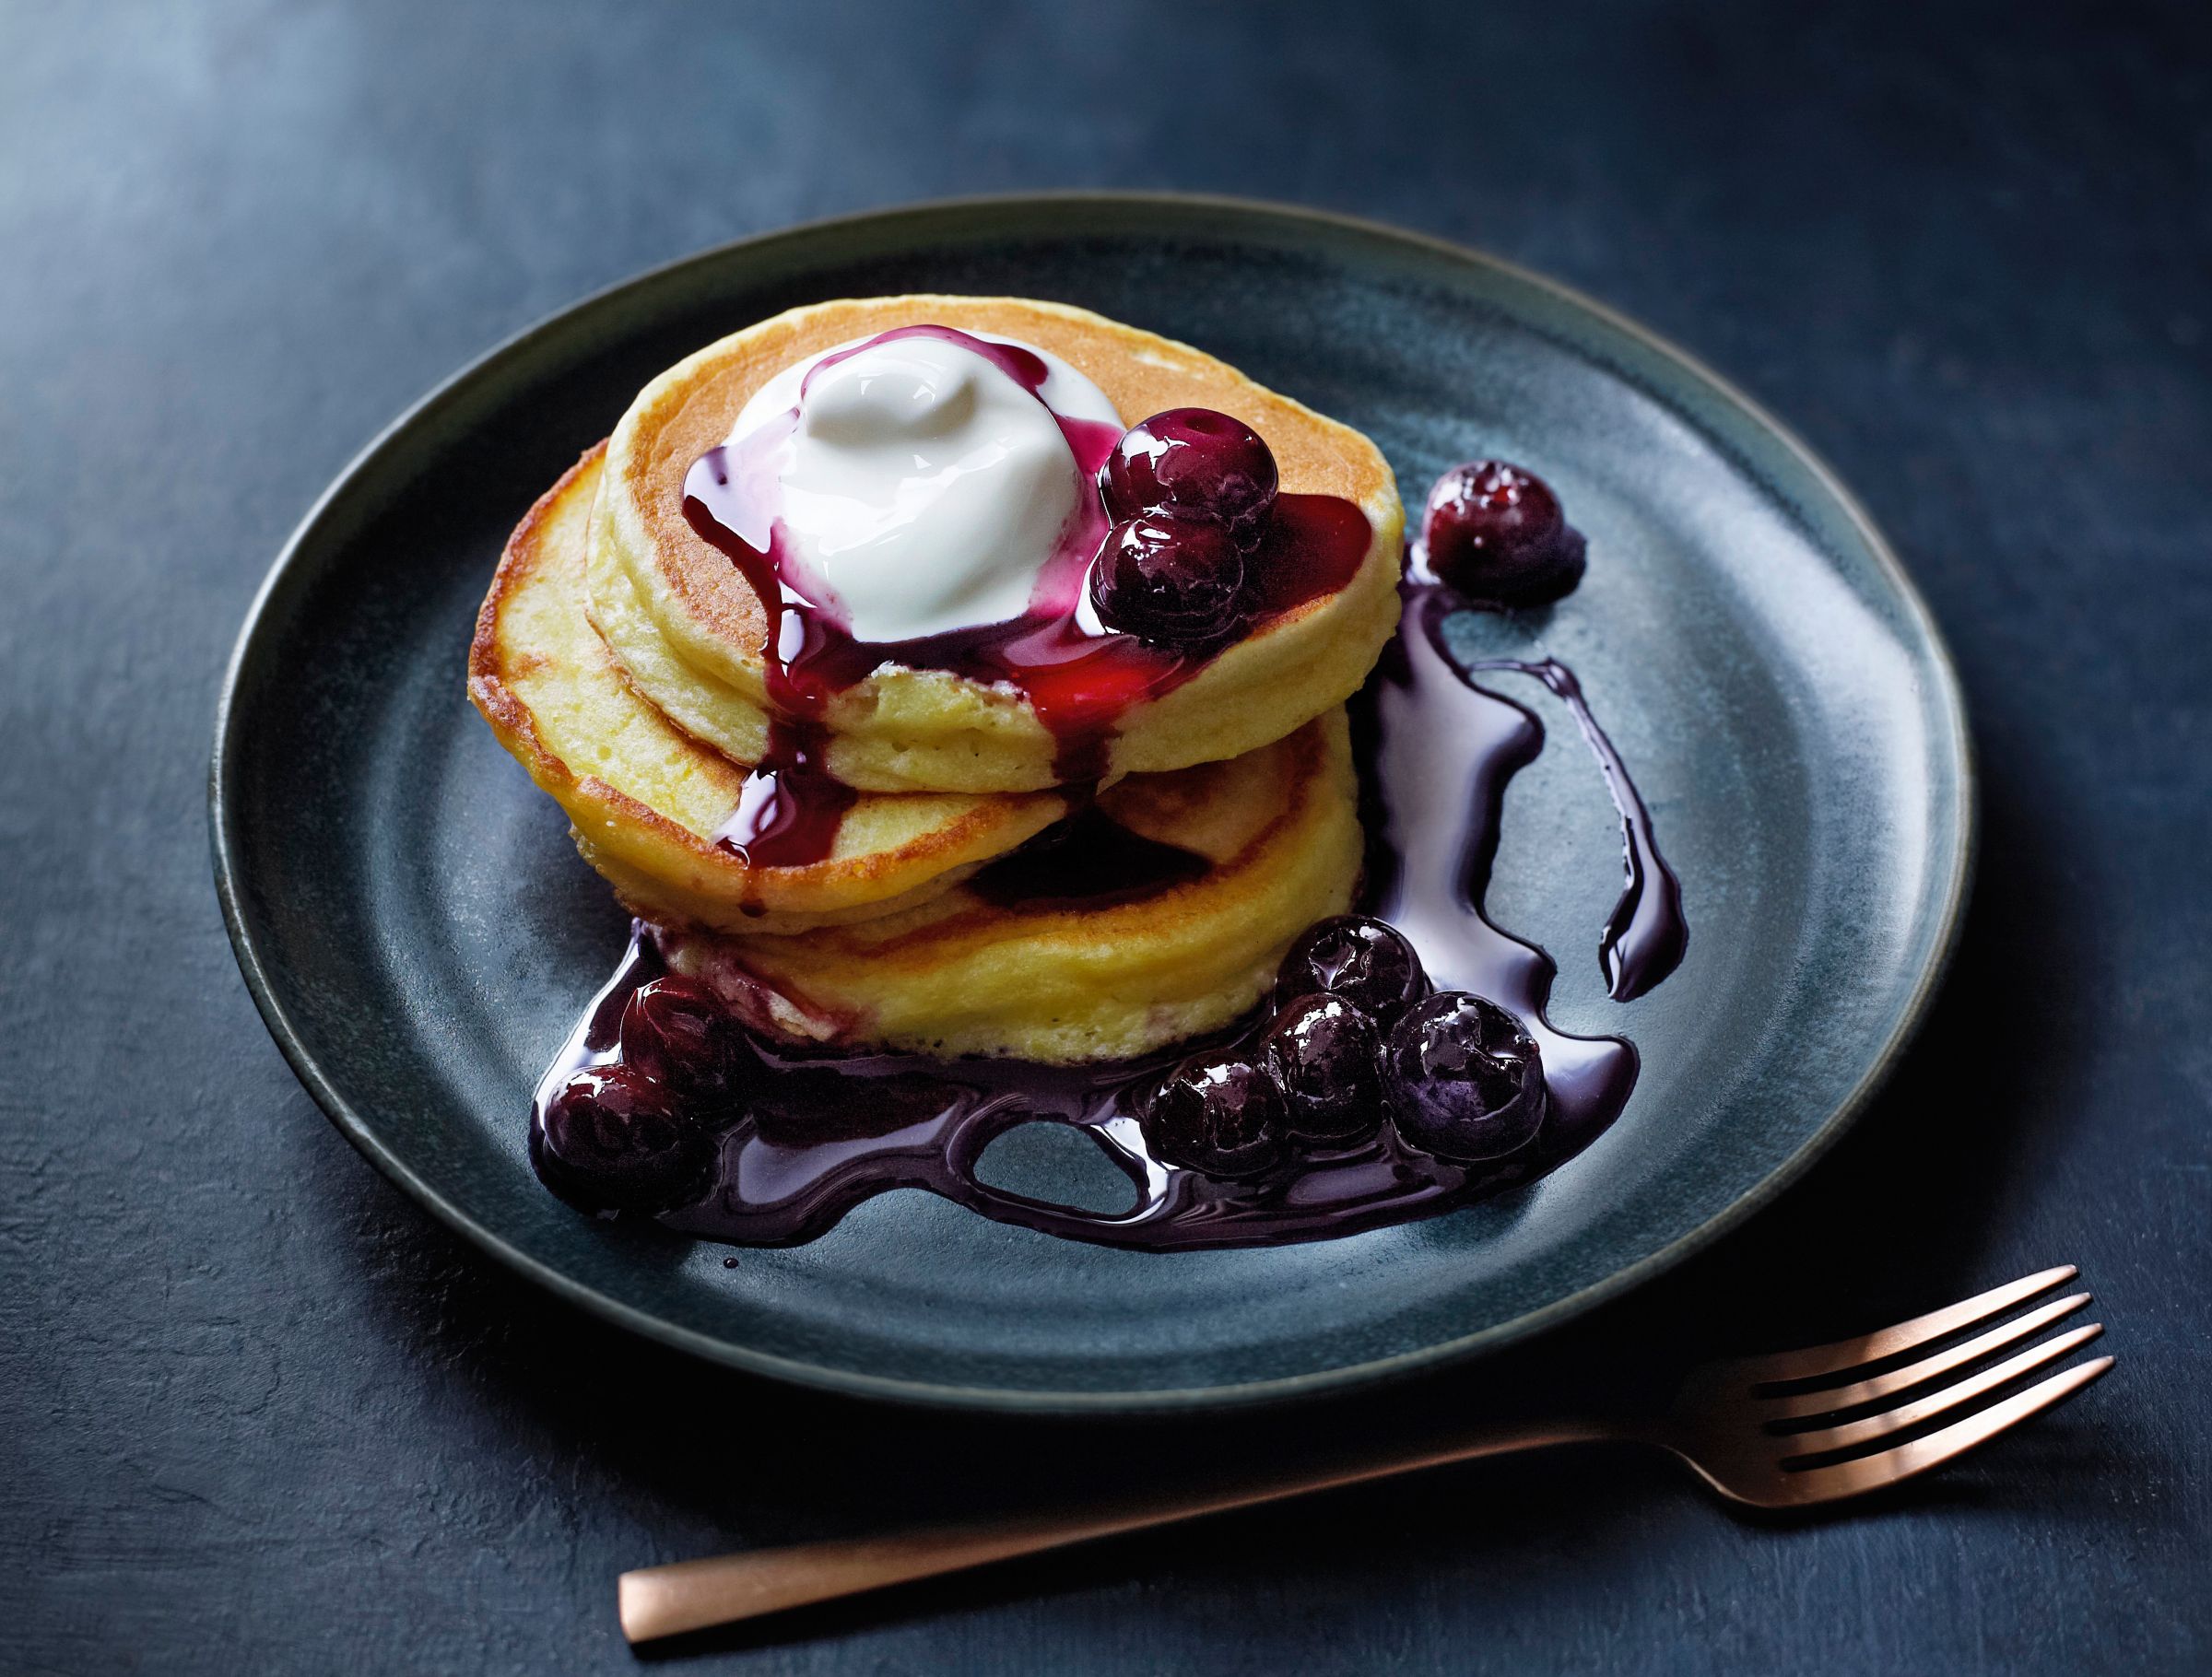 How to enjoy Pancake Day… all day long